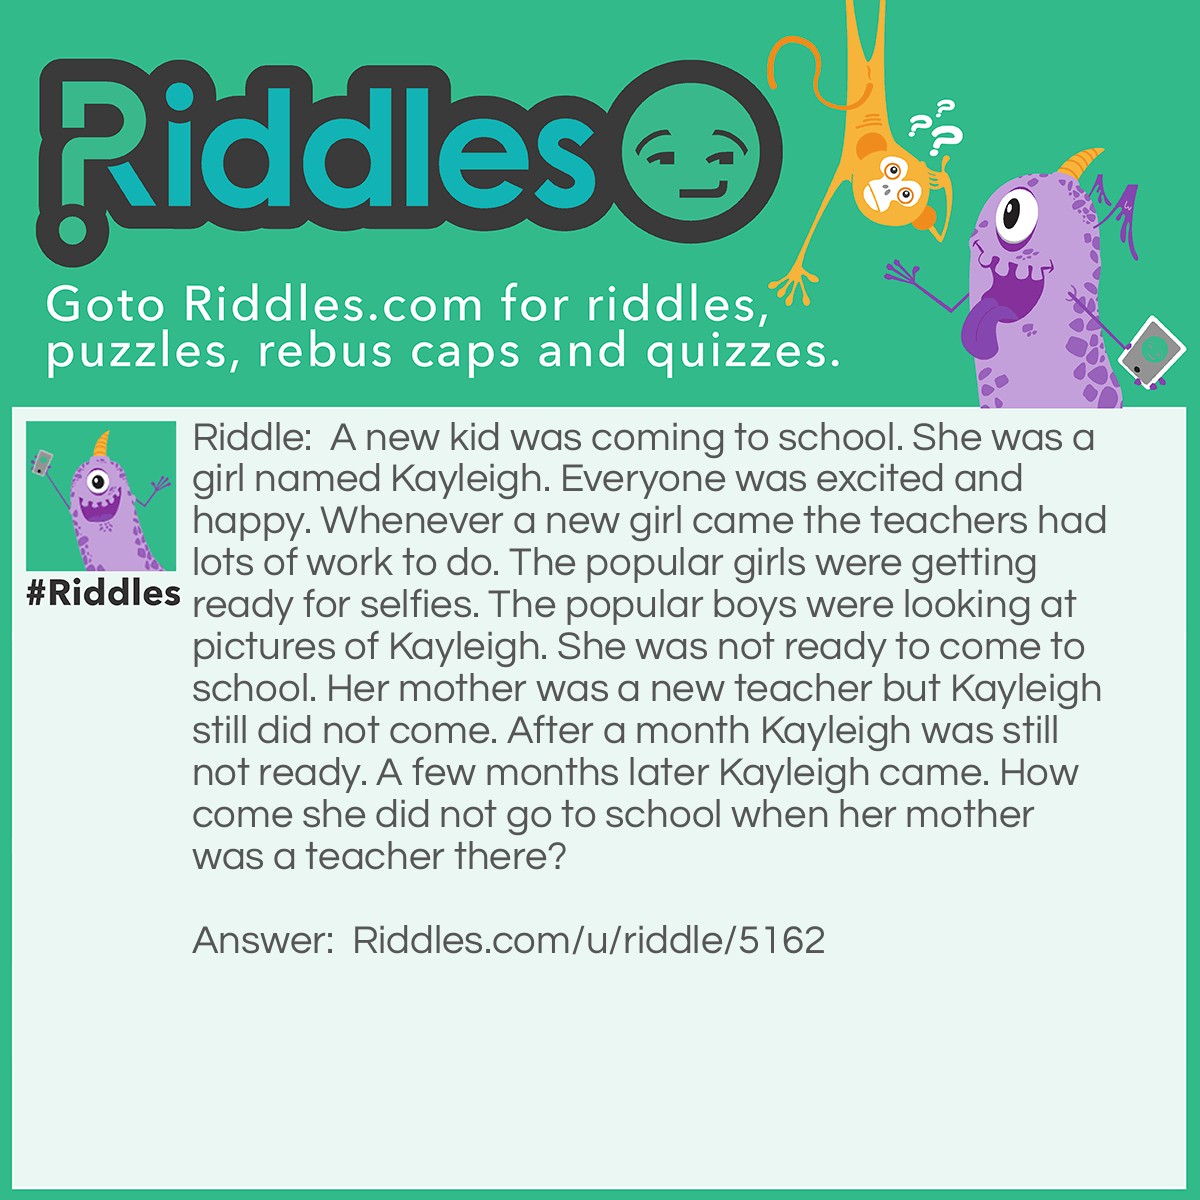 Riddle: A new kid was coming to school. She was a girl named Kayleigh. Everyone was excited and happy. Whenever a new girl came the teachers had lots of work to do. The popular girls were getting ready for selfies. The popular boys were looking at pictures of Kayleigh. She was not ready to come to school. Her mother was a new teacher but Kayleigh still did not come. After a month Kayleigh was still not ready. A few months later Kayleigh came. How come she did not go to school when her mother was a teacher there? Answer: It was Summertime when Kayleigh moved.